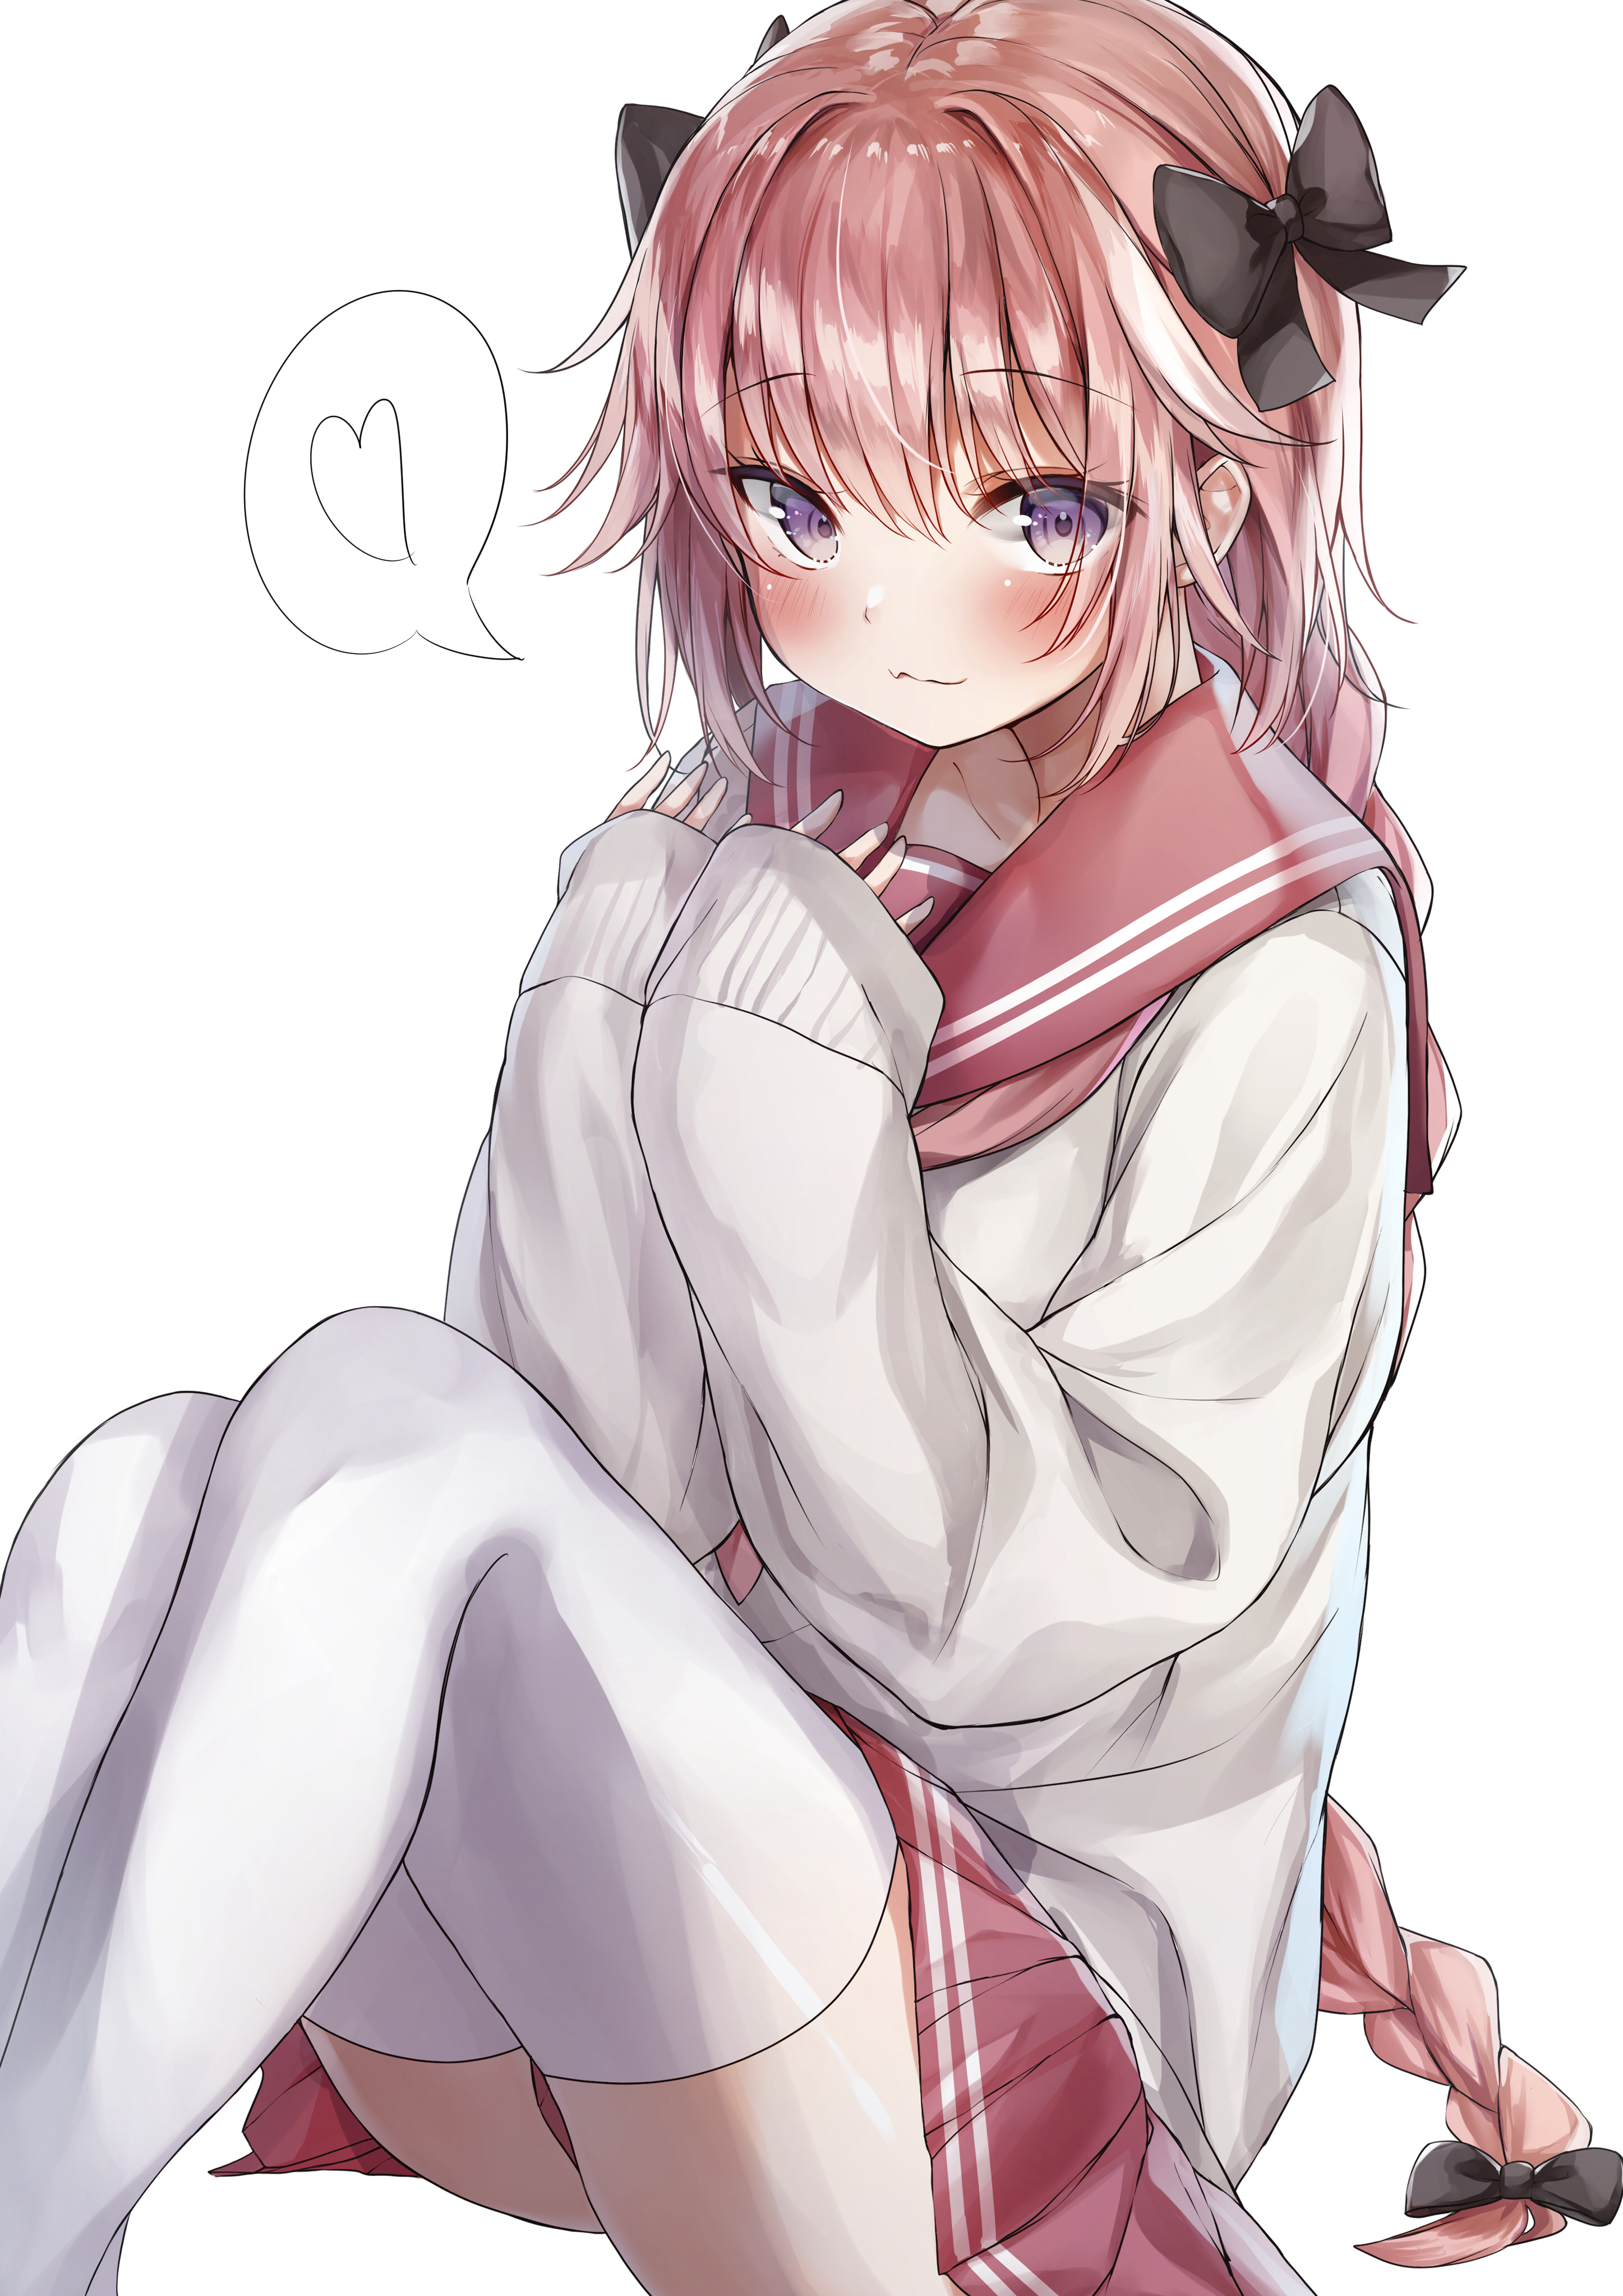 Anime 2894x4093 Fate/Apocrypha  Fate series school uniform thighs white stockings miniskirt sailor uniform blushing femboy anime boys bangs hair in face french braids purple eyes black ribbons 2D looking at viewer pink hair long hair smiling zettai ryouiki hair bows Astolfo (Fate/Apocrypha) Fate/Grand Order anime simple background portrait display fan art Mochi Nabe sitting ecchi speech bubble